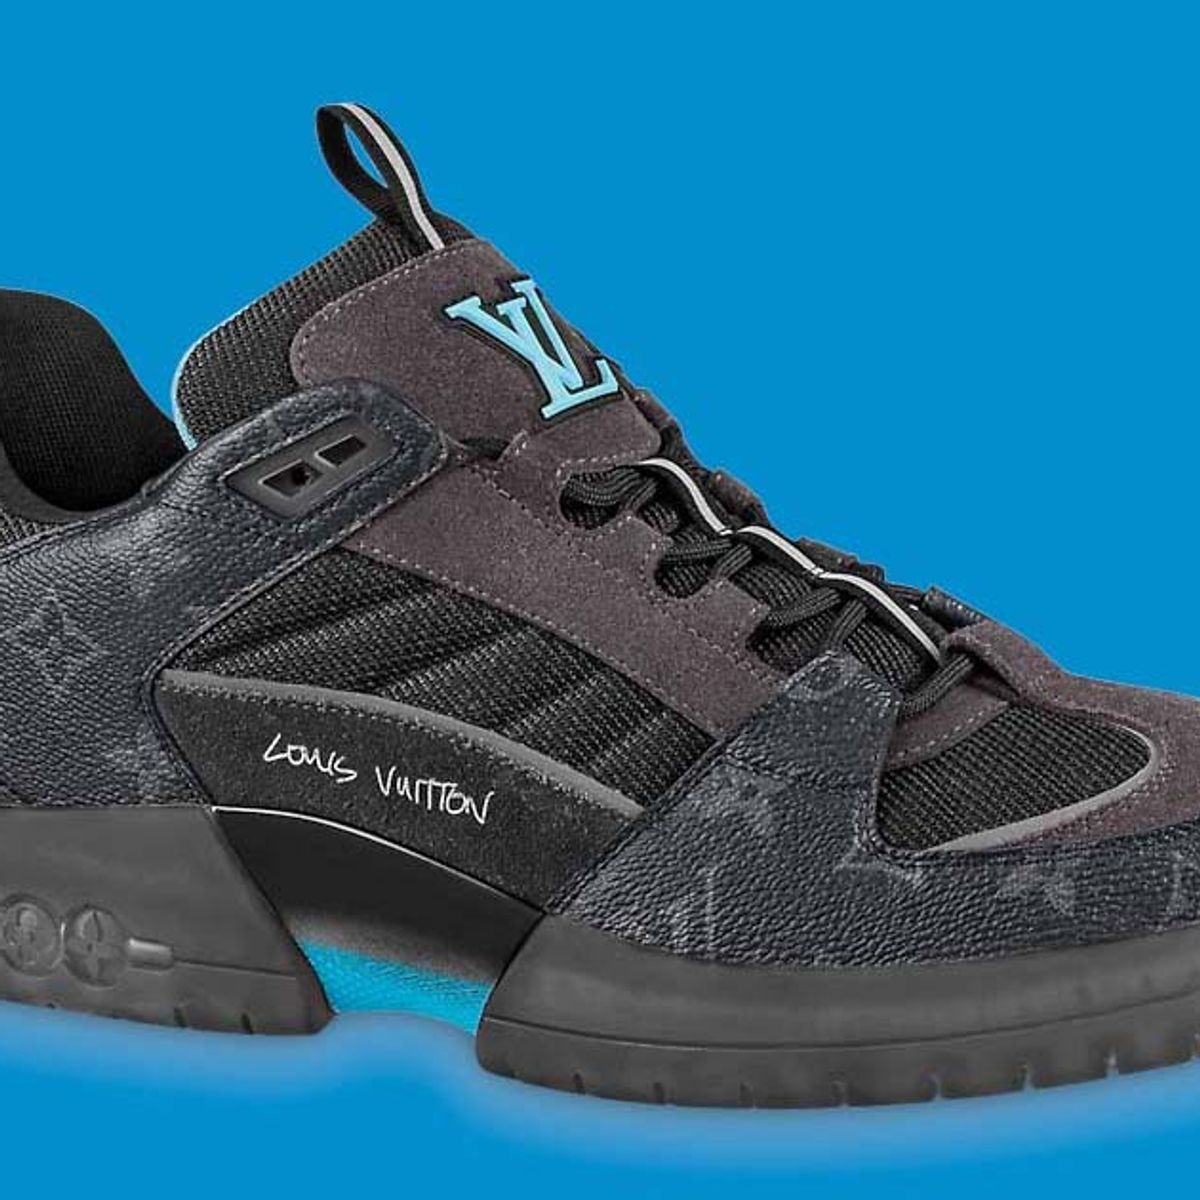 Louis Vuitton's First Skate Shoe Designed By Lucien Clarke